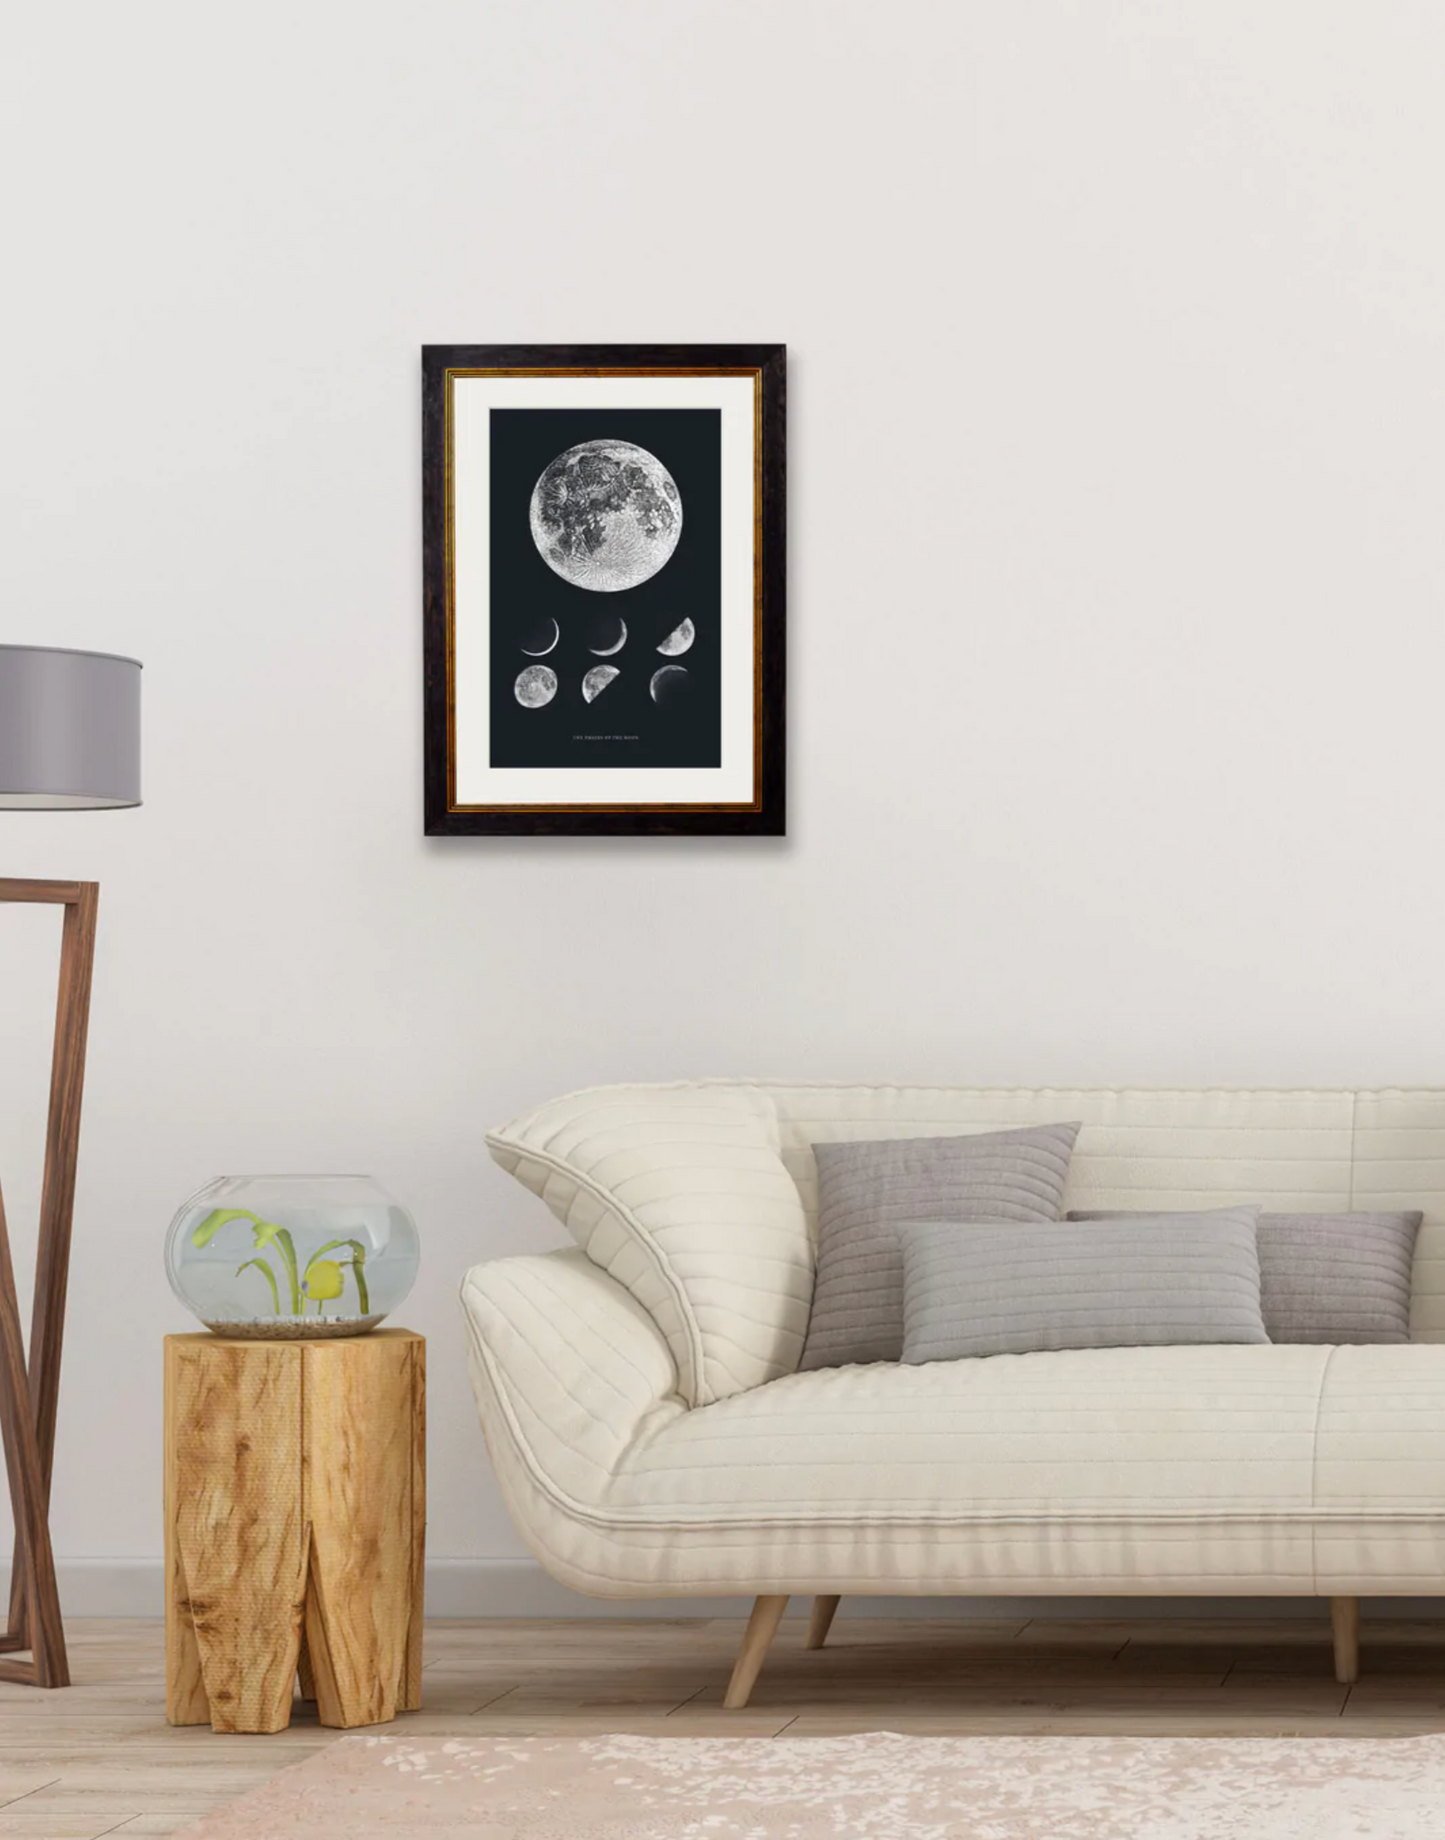 Vintage Round Framed Print, 1910 Phases Of The Moon